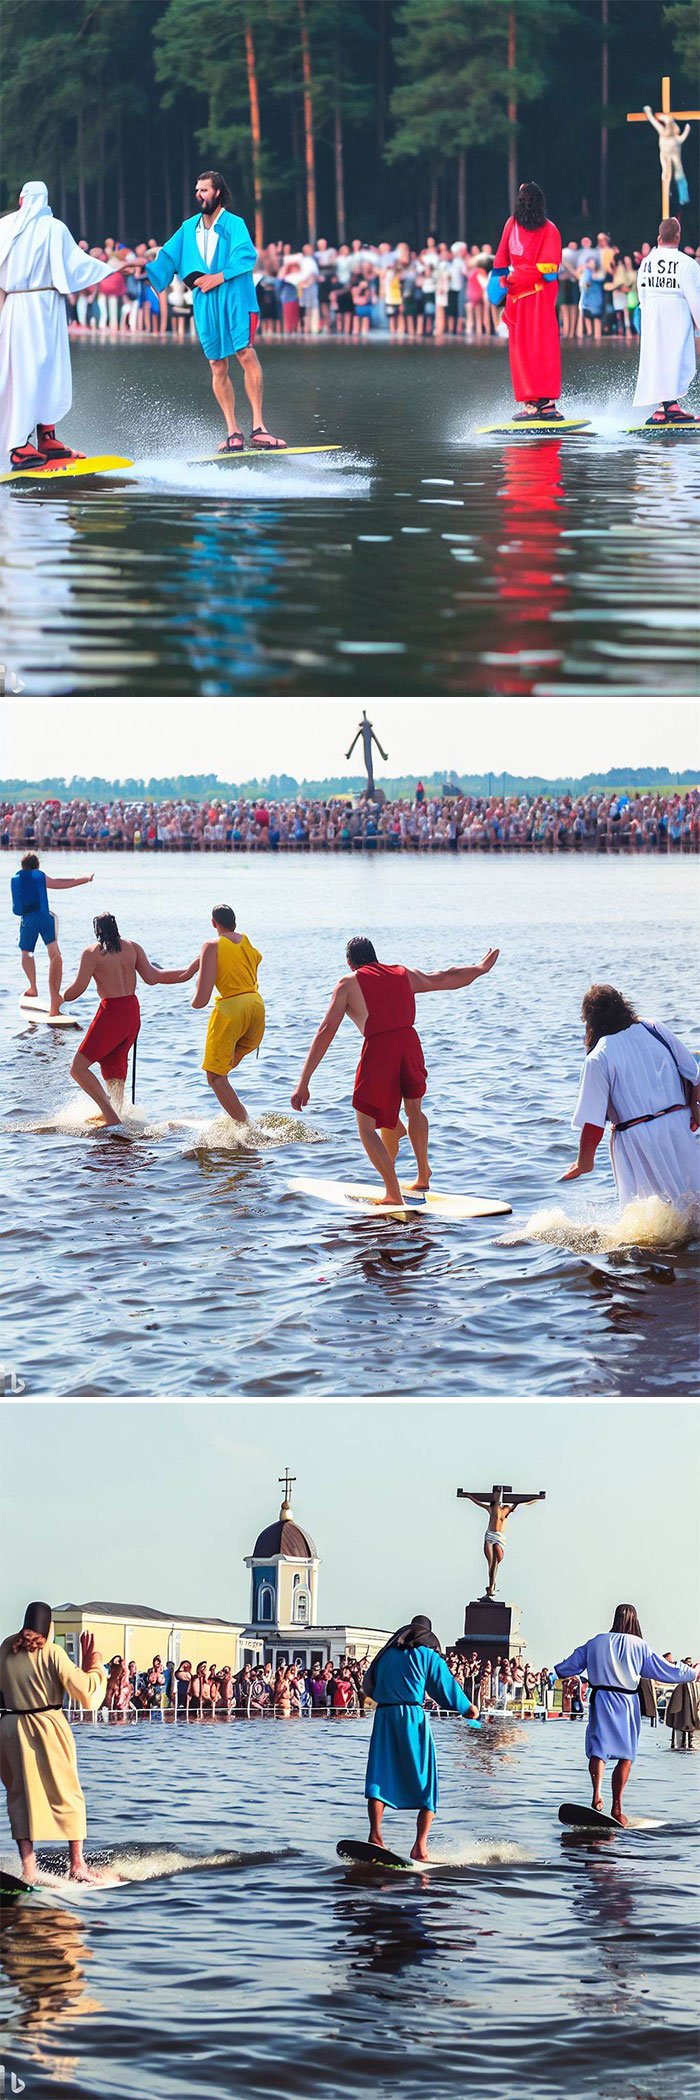 Extreme Walking-On-Waters Competition Among Jesus Christ Doppelgangers (I Love How Ai Keeps It Real With The Boards)